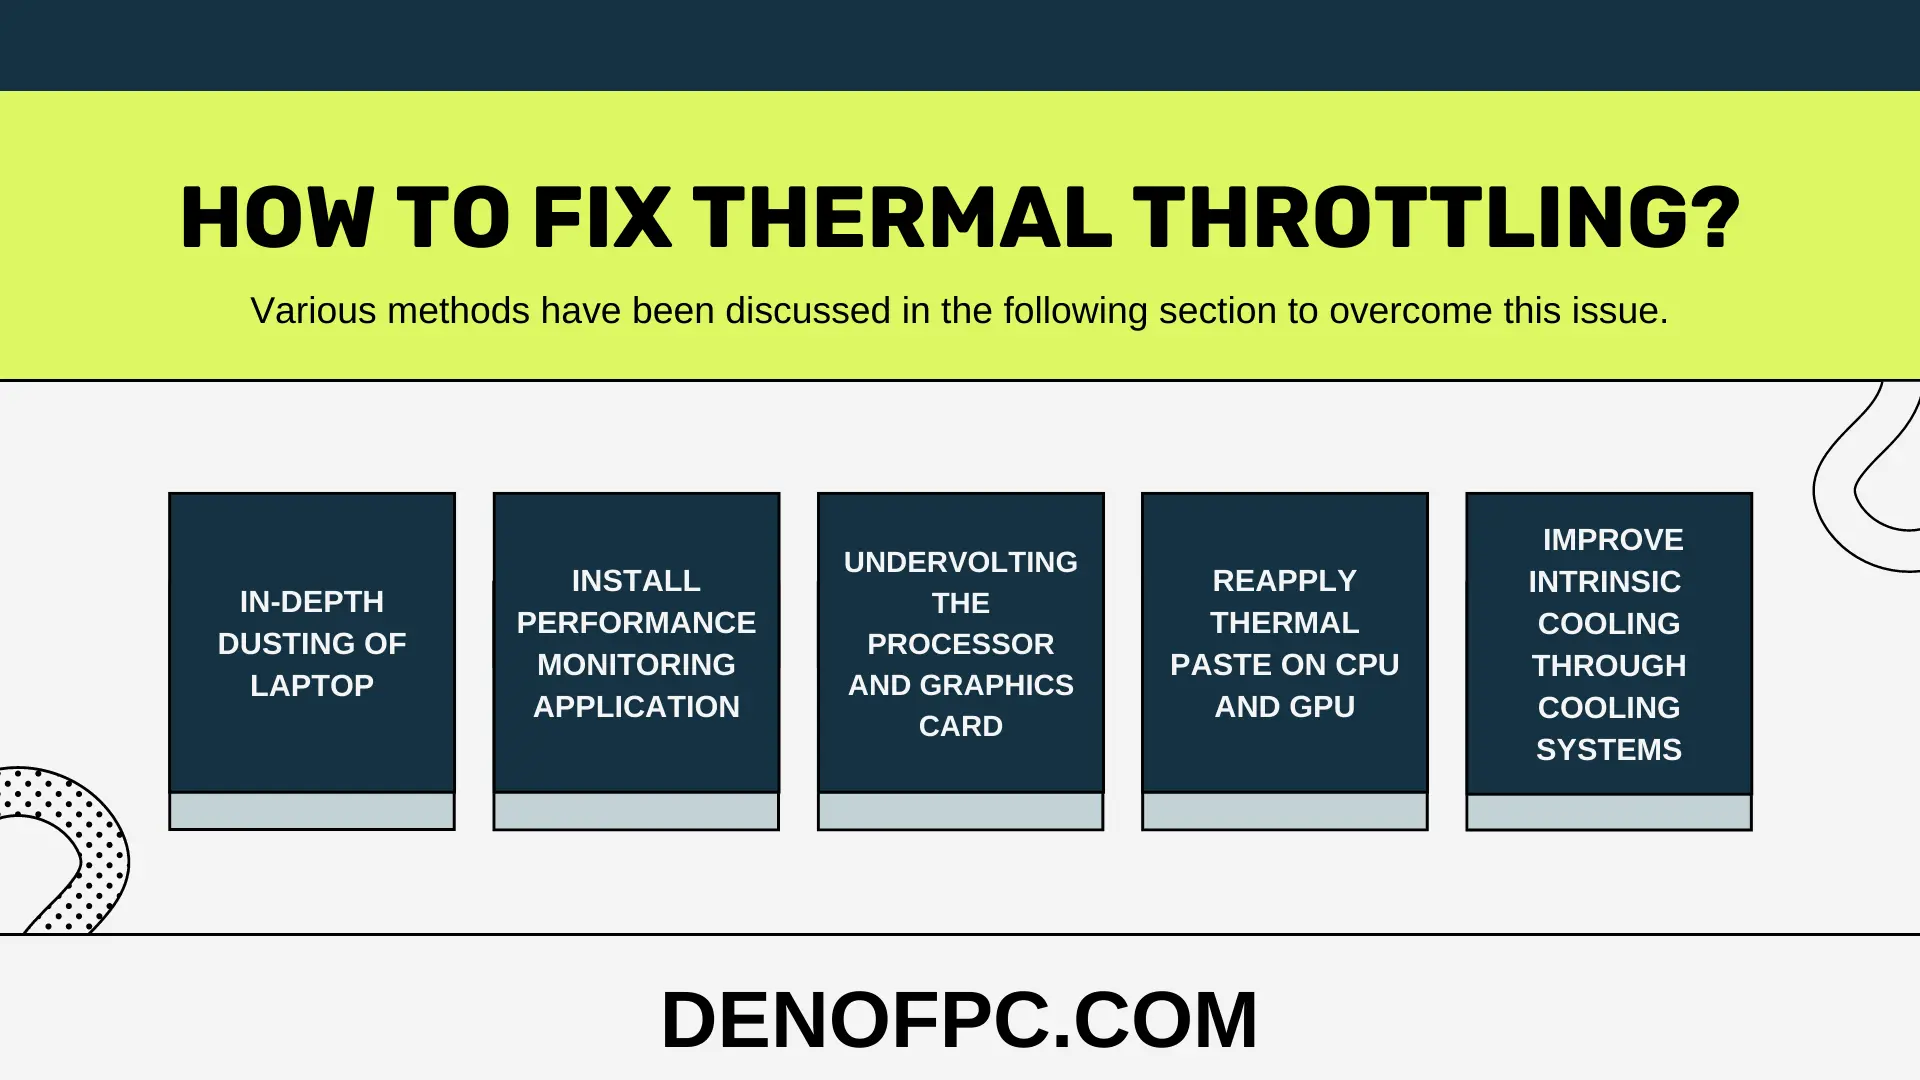 How to Fix Thermal Throttling